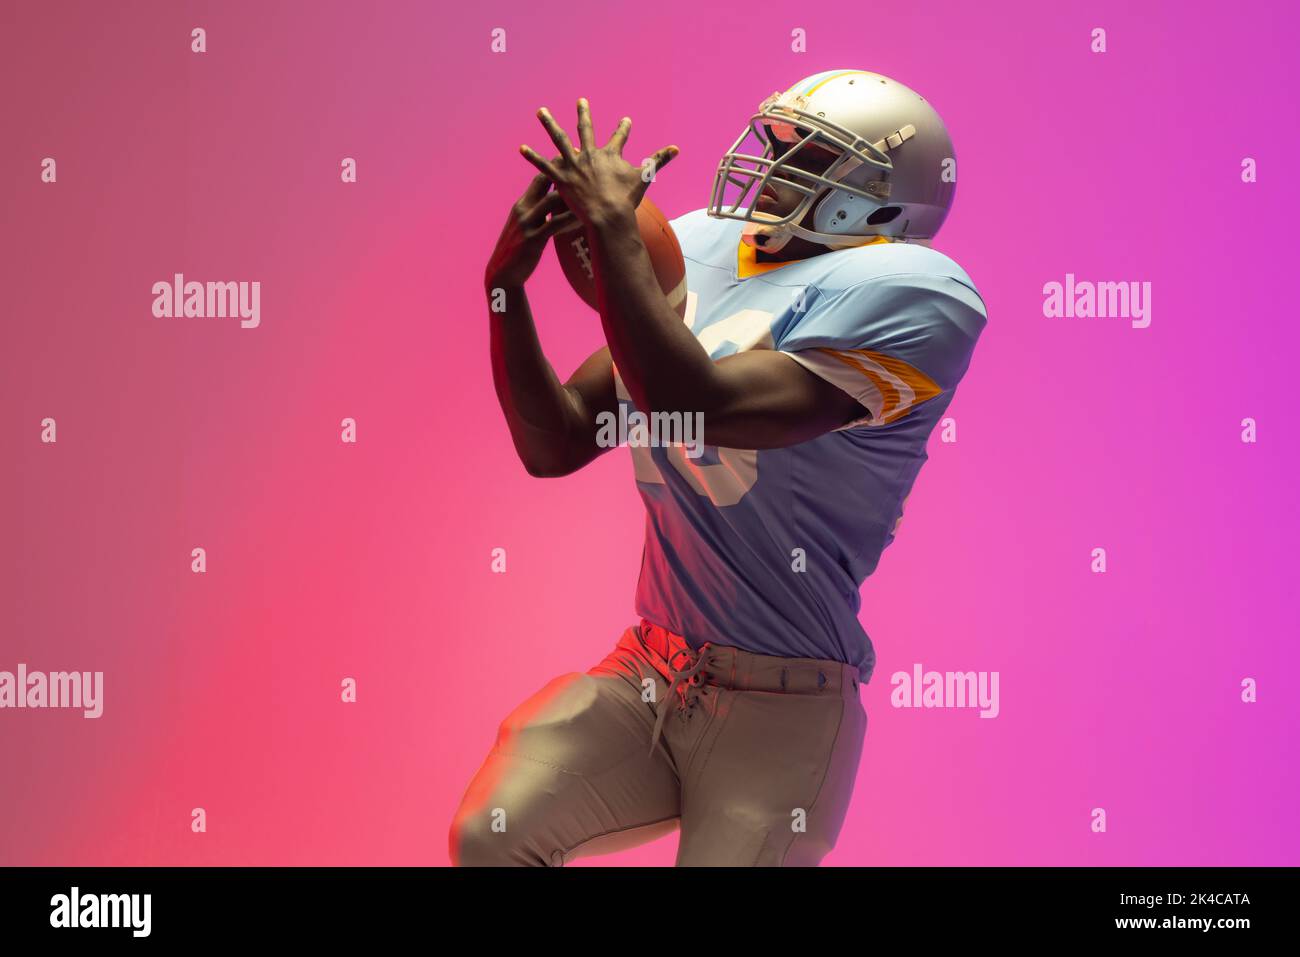 African american male american football player holding ball with neon pink lighting. Sport, movement, training and active lifestyle concept. Stock Photo